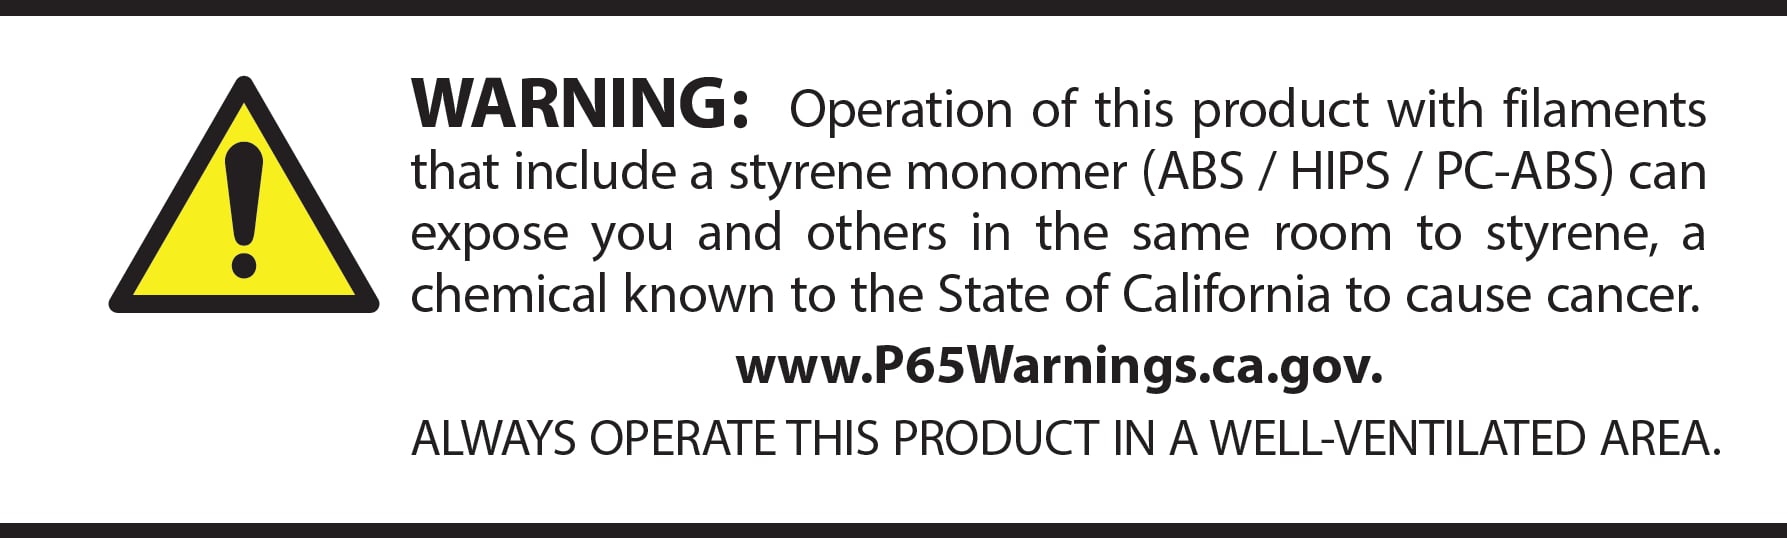 Warning: Operation of this product with filaments that include a styrene monomer (ABS / HIPS / PC-ABS) can expose you and other in the same room to styrene, a chemical known to the State of California to cause cancer.